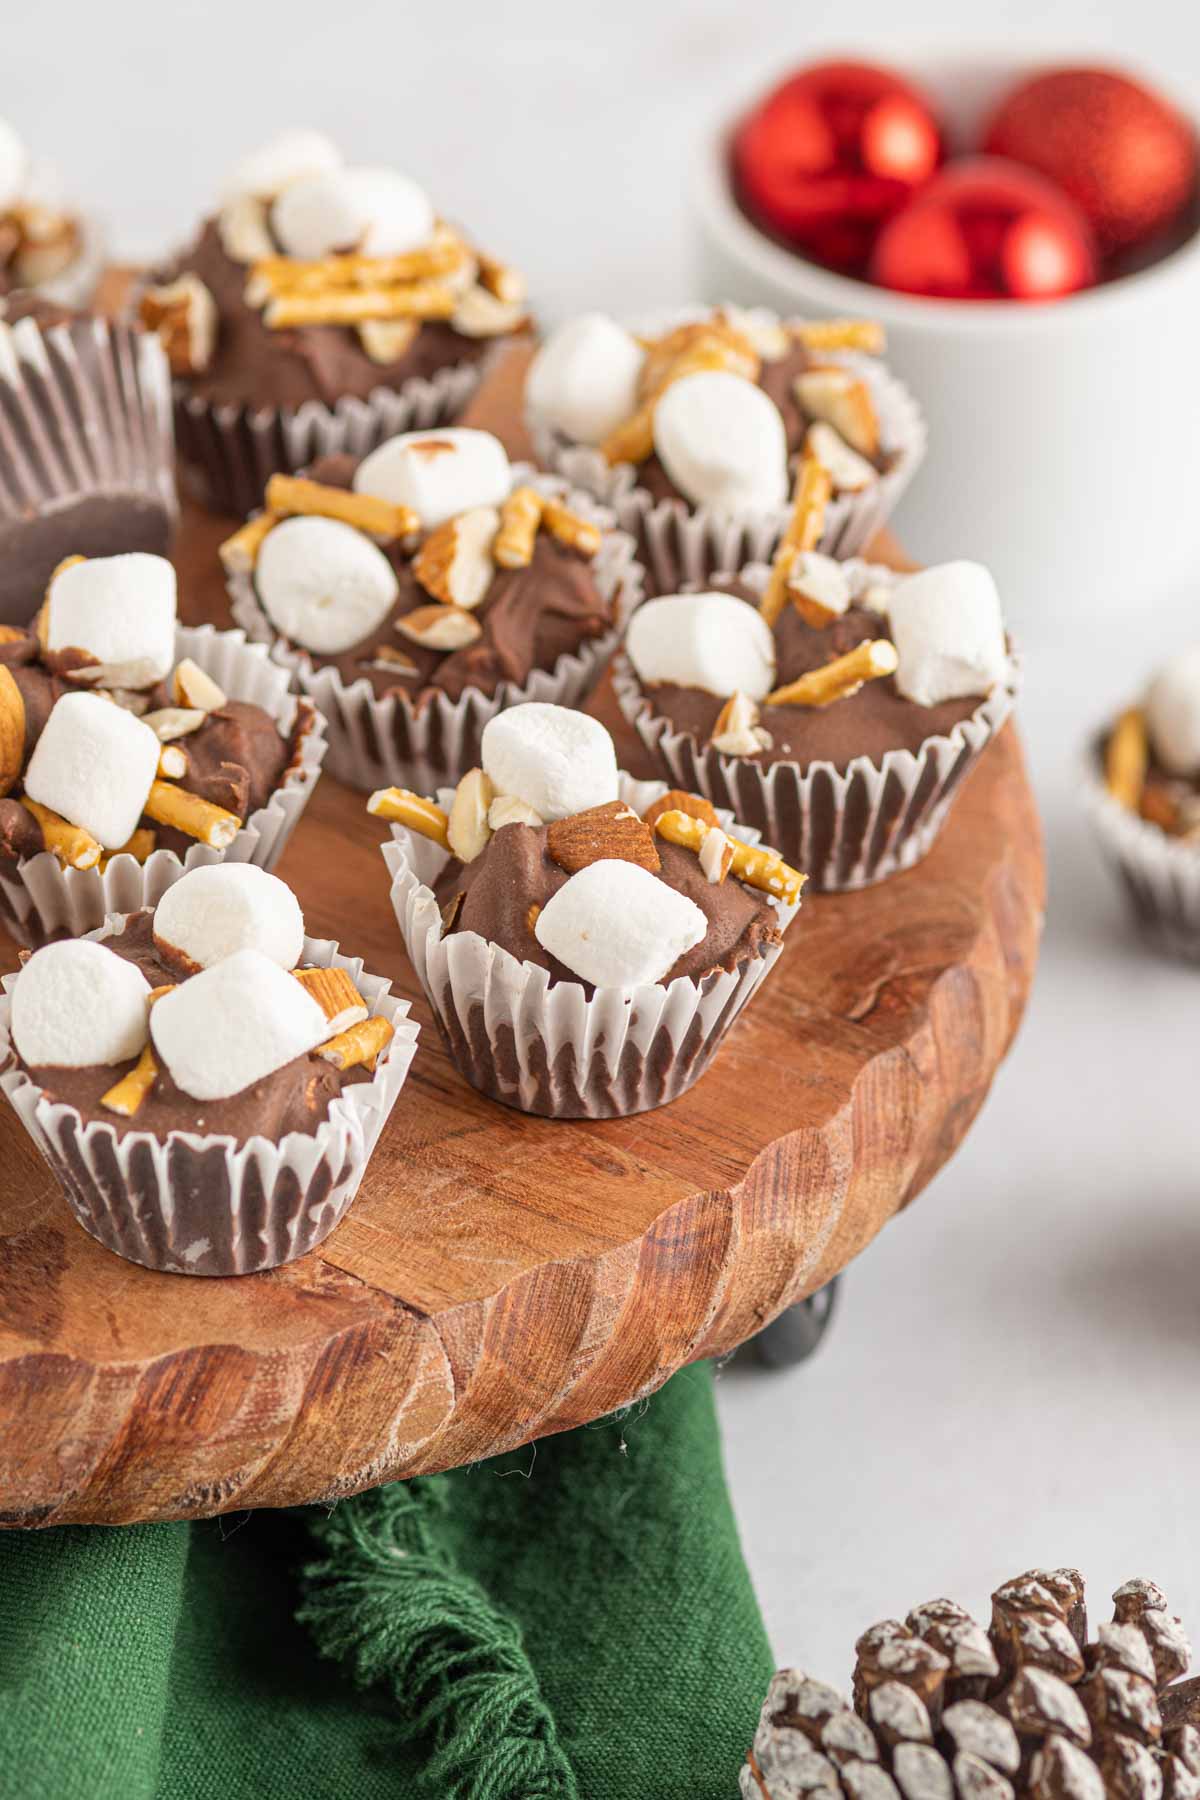 Wood cake stand with rocky road bites